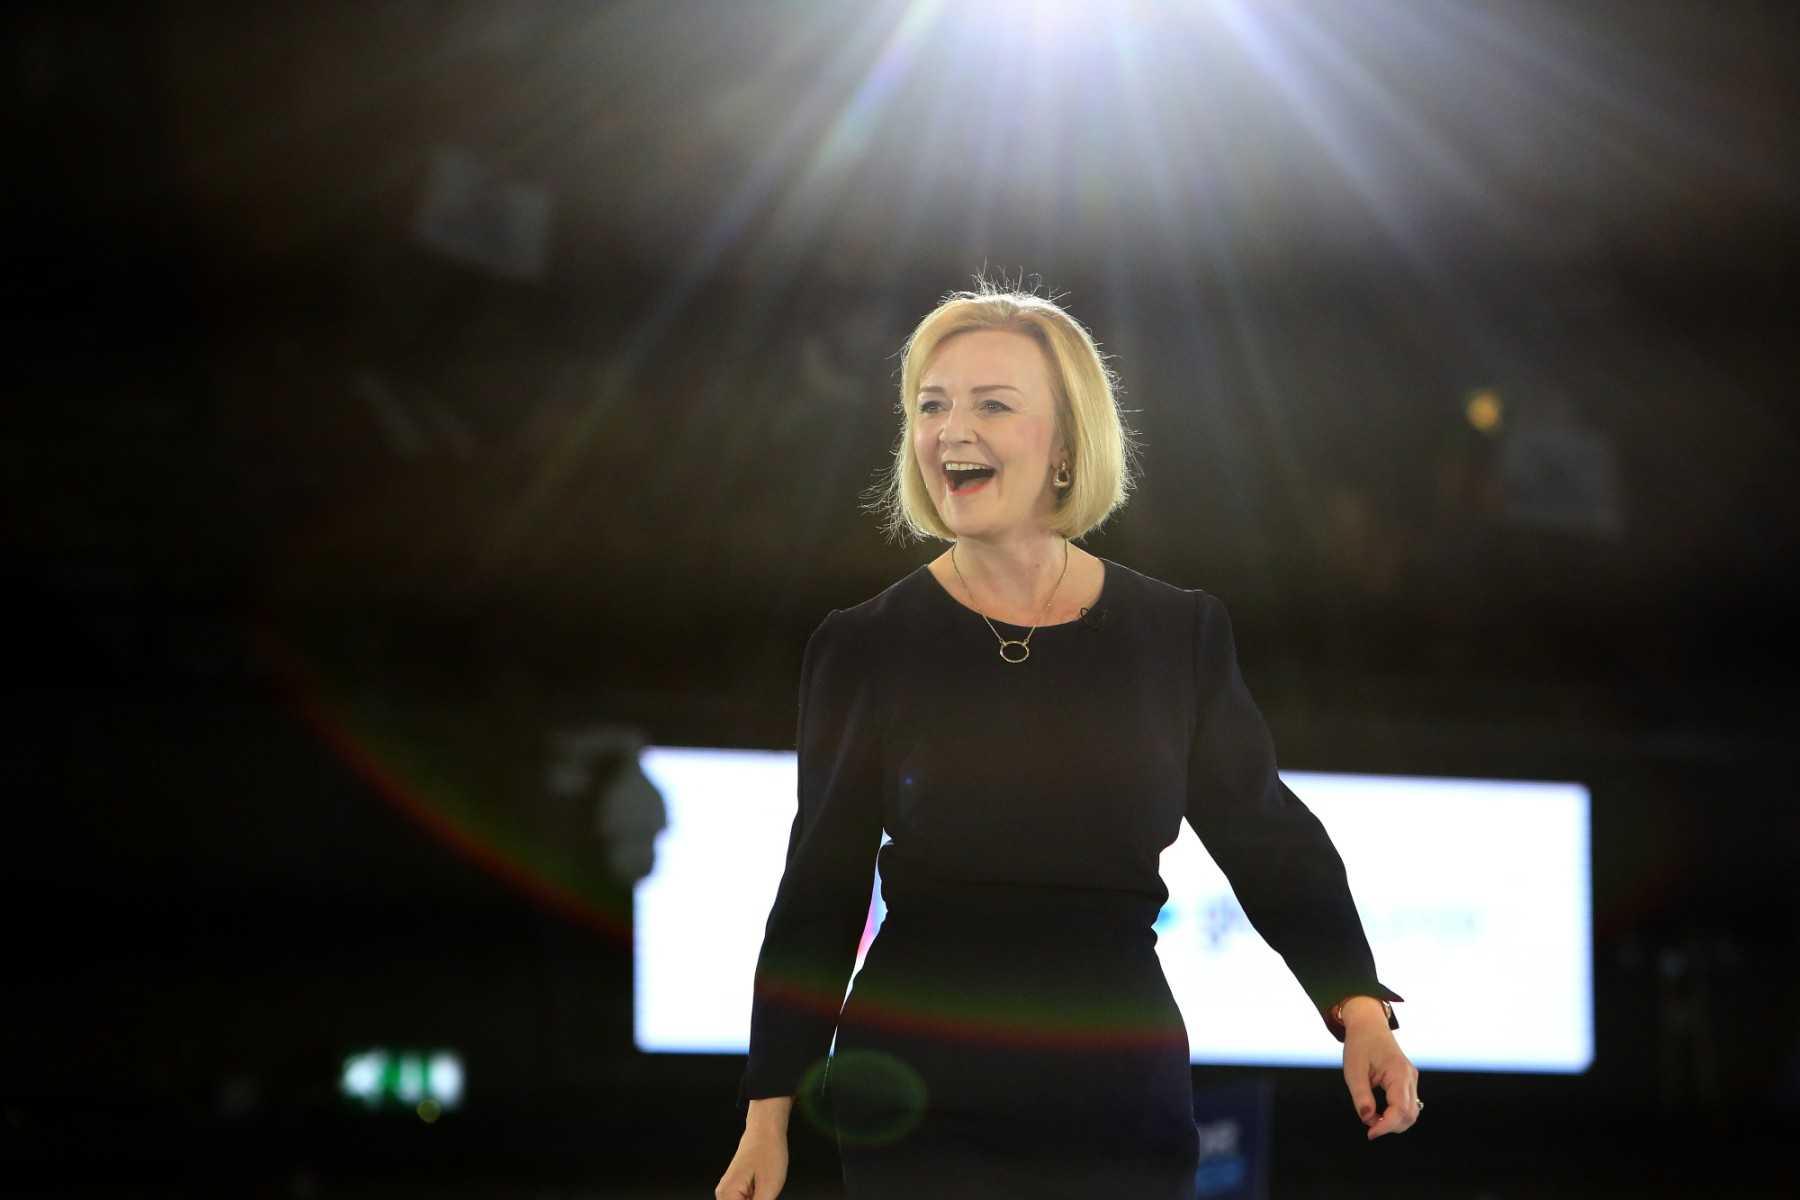 Liz Truss, Britain's foreign secretary and a contender to become the country's next prime minister and leader of the Conservative party, answers questions as she takes part in a Conservative party hustings event at Wembley Arena, in London, on Aug 31. Photo: AFP